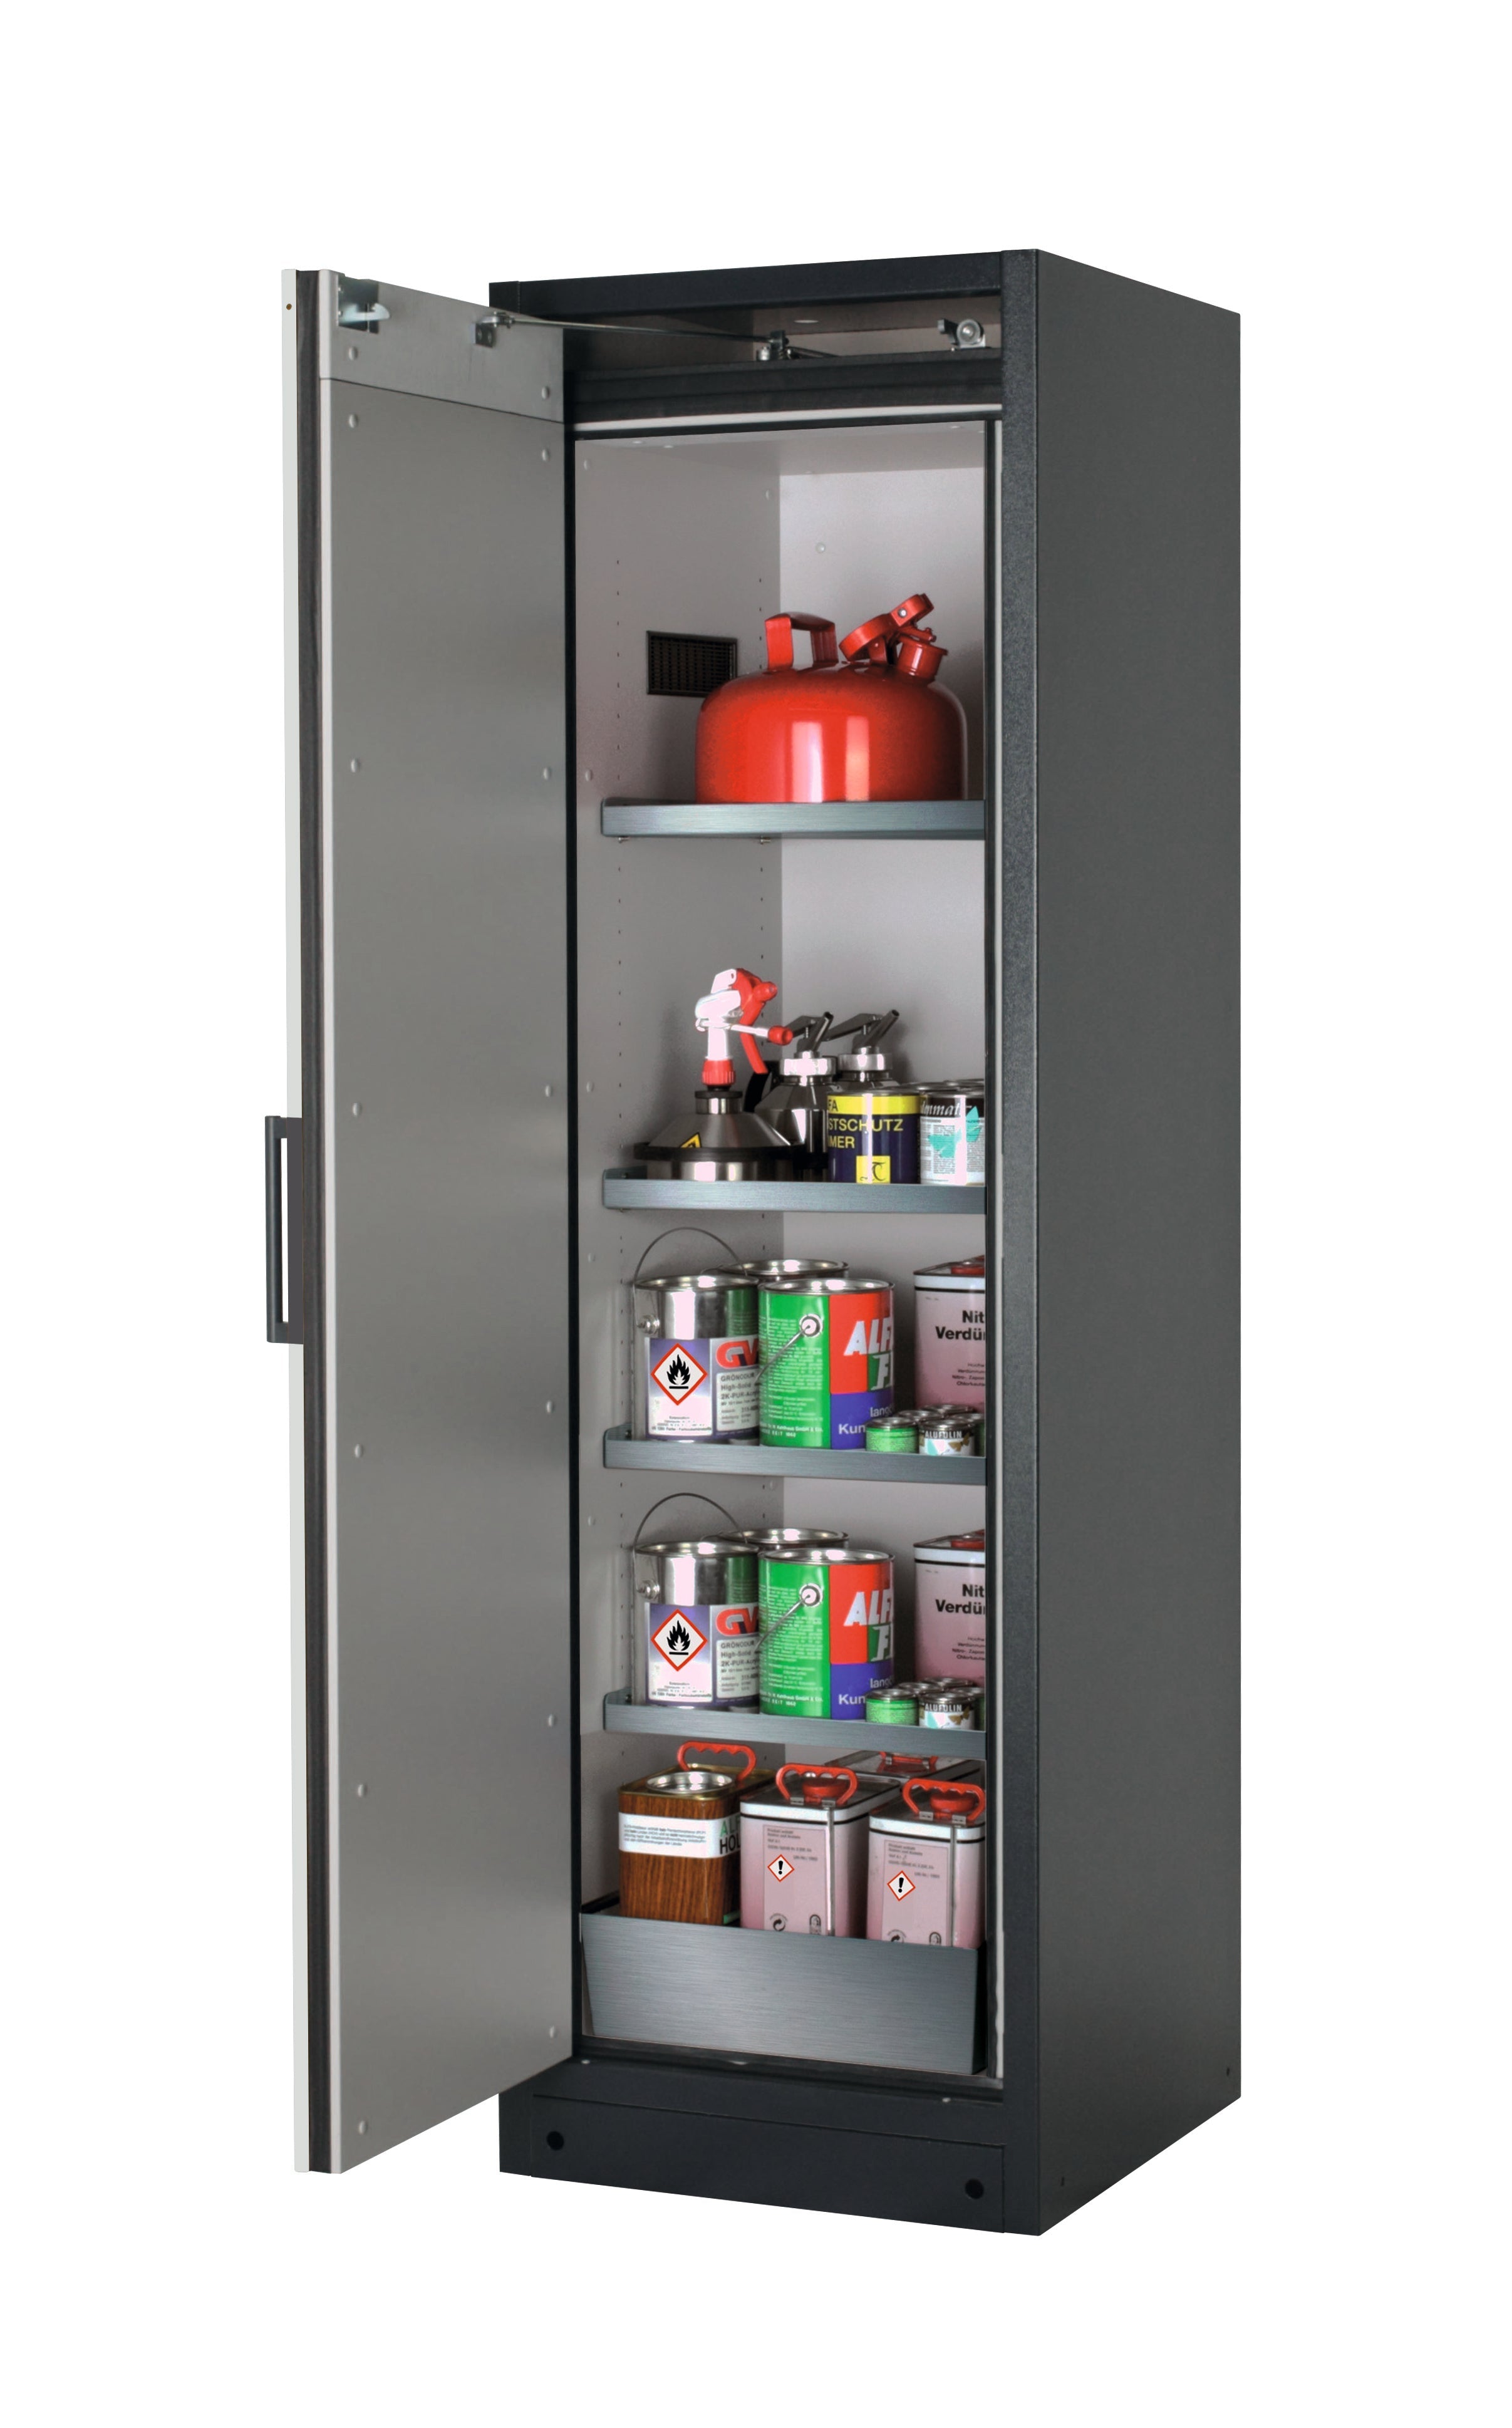 Type 90 safety storage cabinet Q-PEGASUS-90 model Q90.195.060.WDAC in light grey RAL 7035 with 4x shelf standard (stainless steel 1.4301),